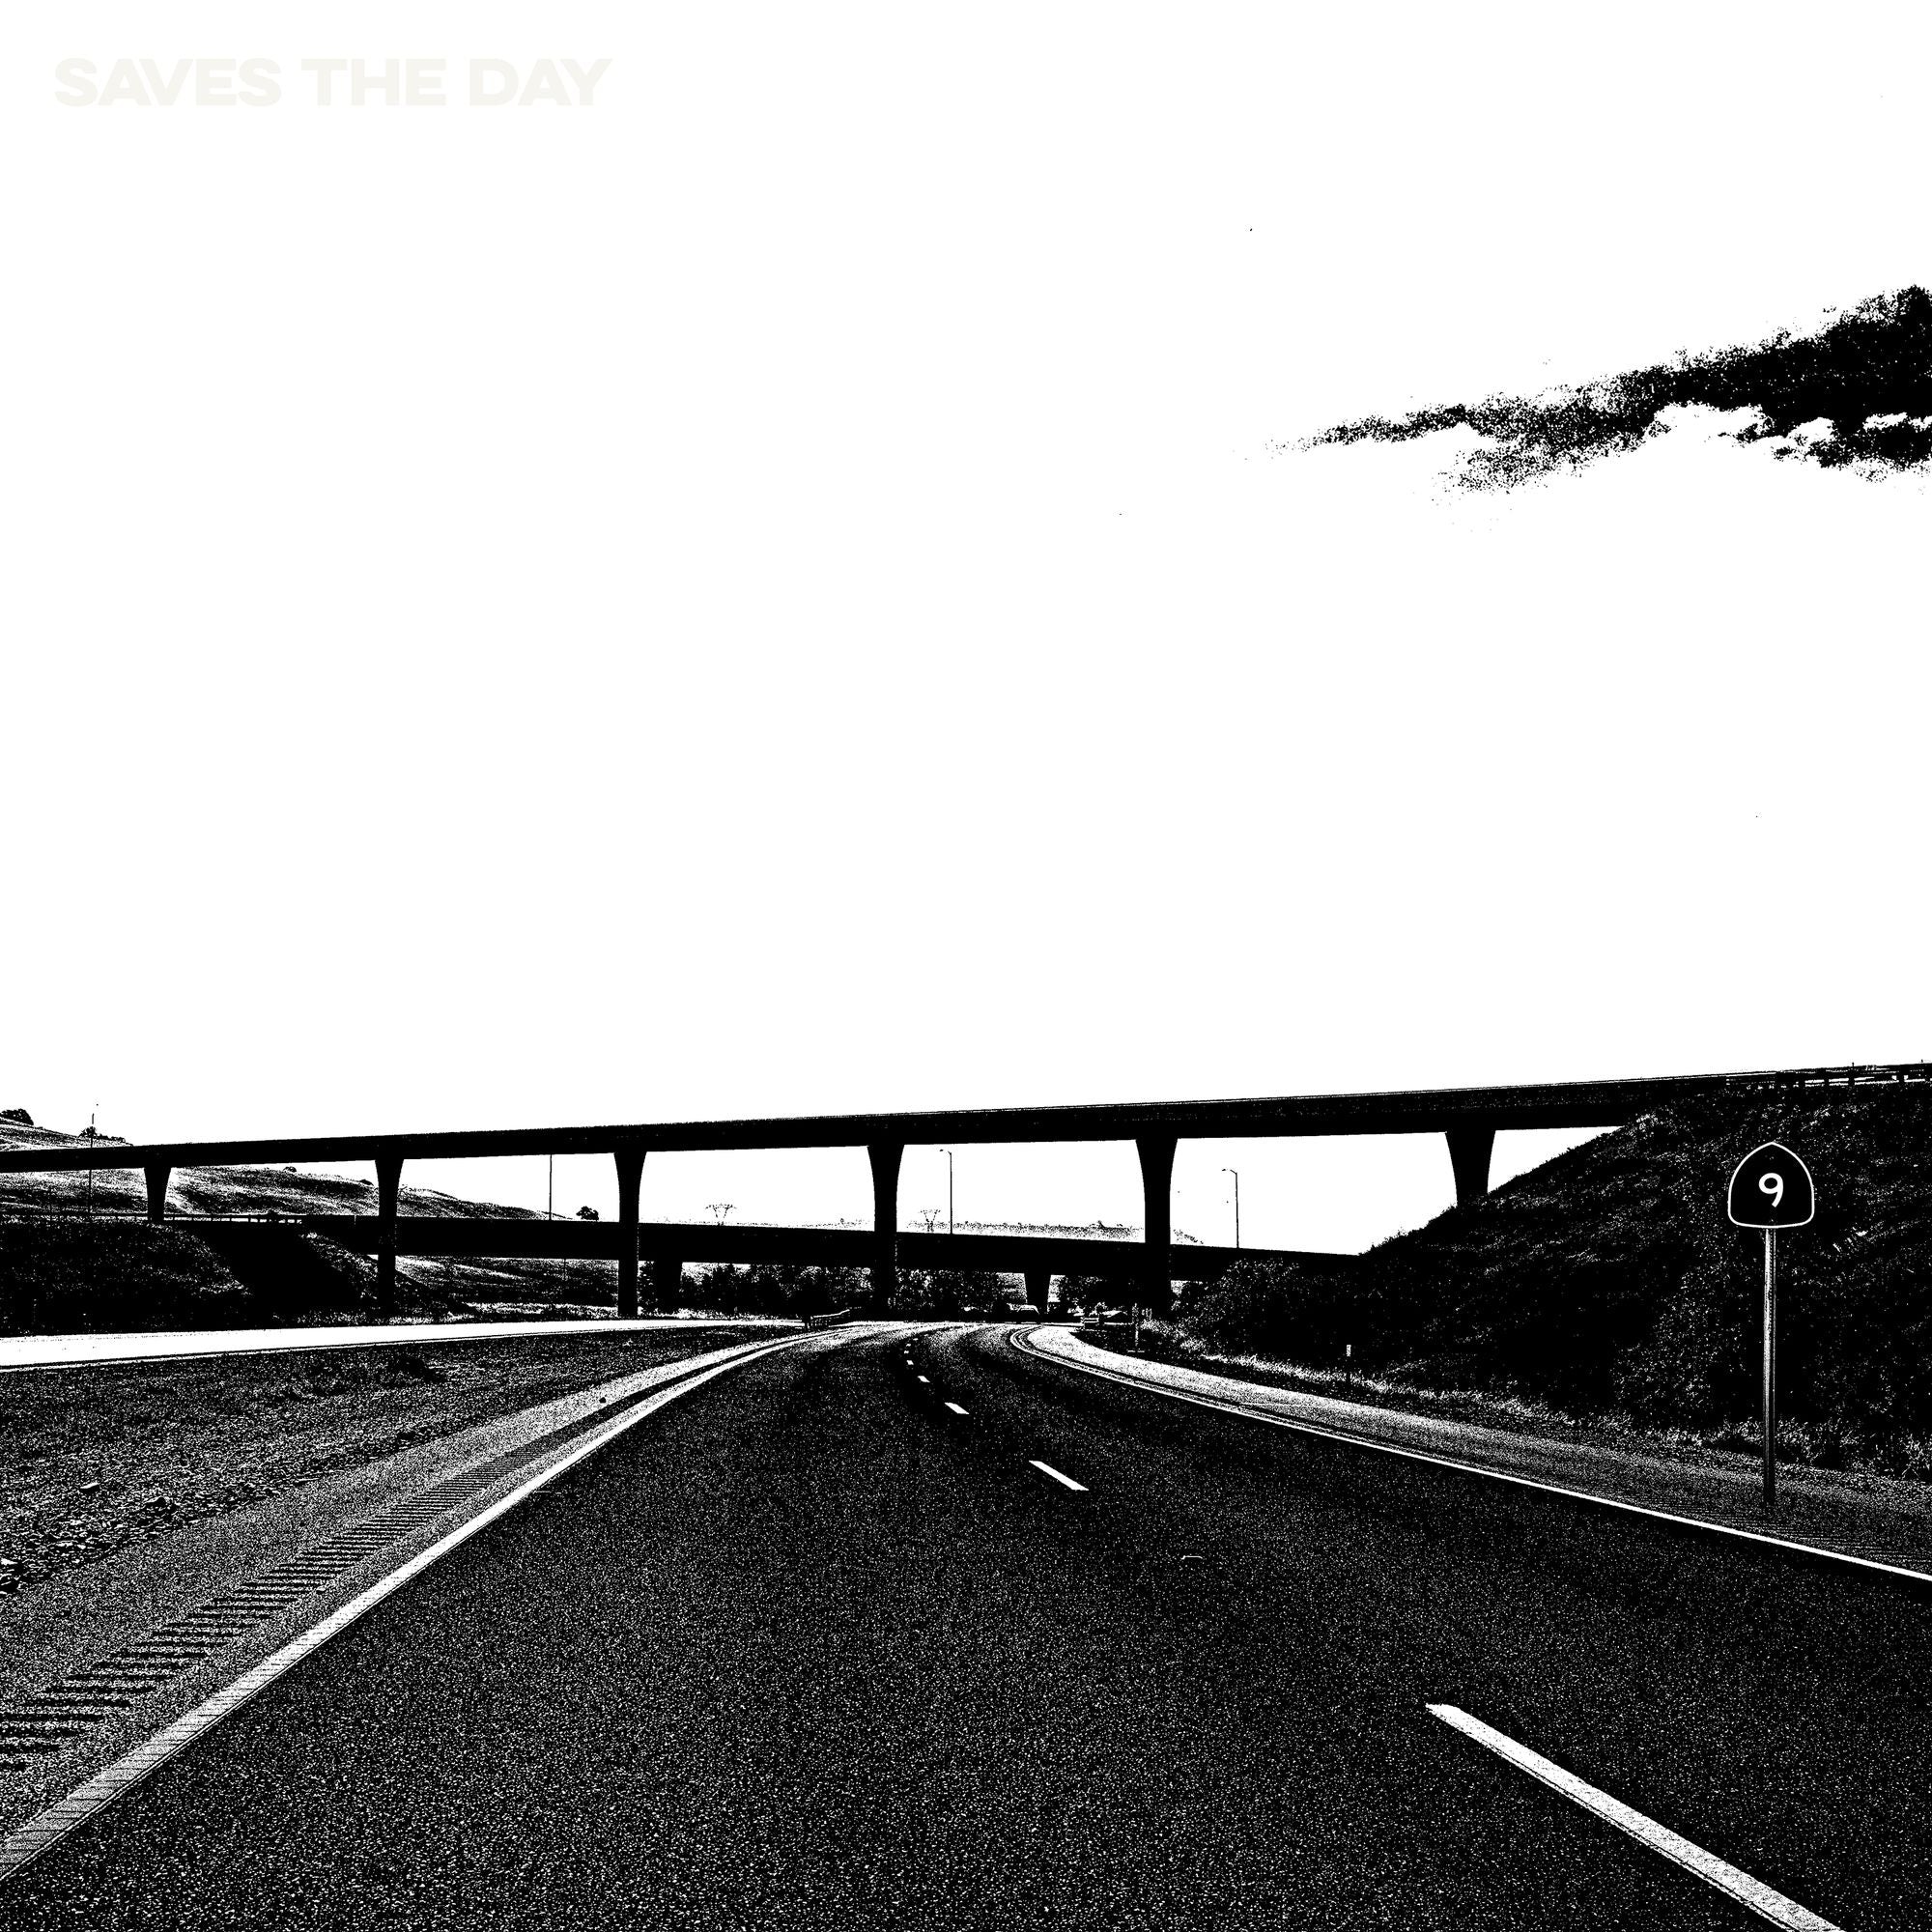 Saves The Day ‎– 9 - New Vinyl Lp 2018 Equal Vision Limited Pressing on Opaque Pink Vinyl - Alt-Rock / Pop Punk